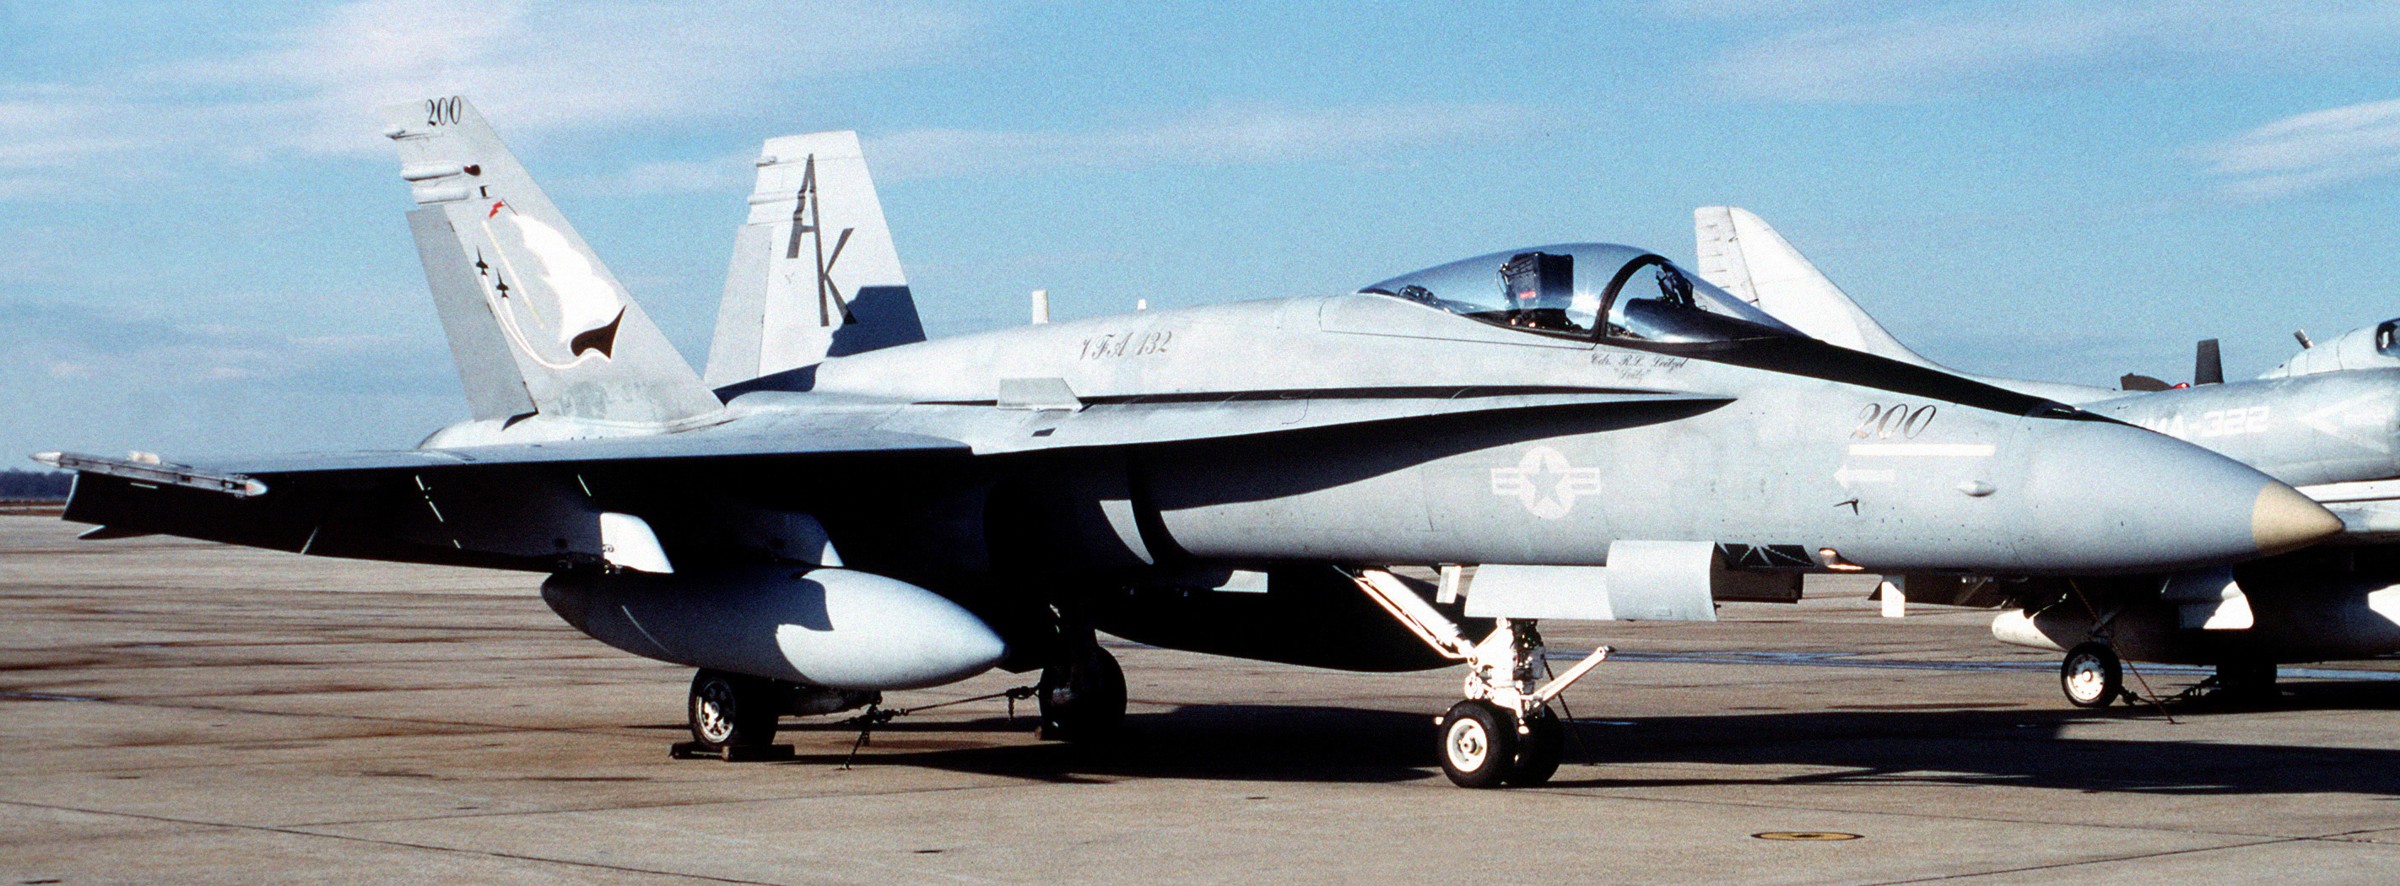 vfa-132 privateers strike fighter squadron f/a-18a hornet cvw-13 uss coral sea cv-43 1990 03